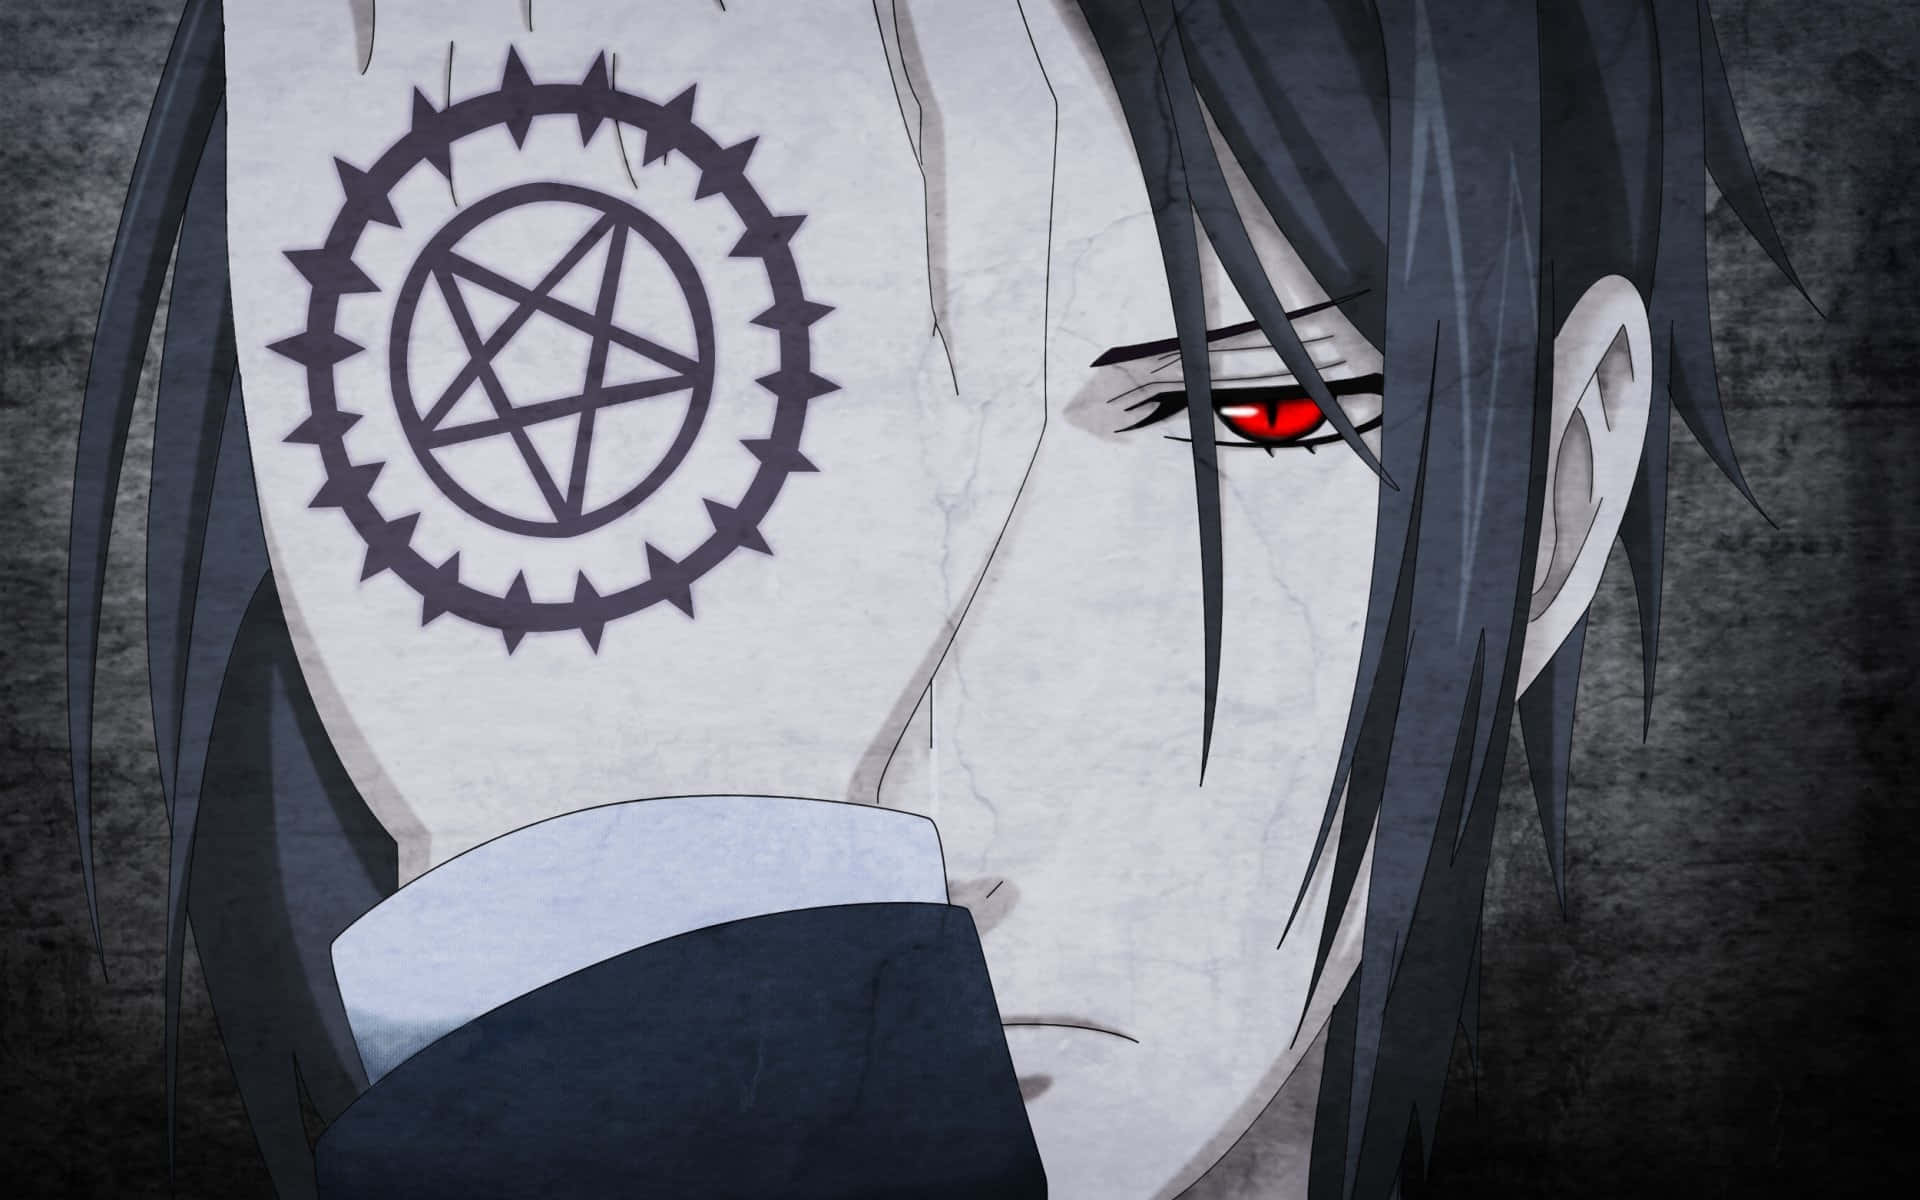 "The Earl of Phantomhive, Ciel Phantomhive, never backs down from a challenge"